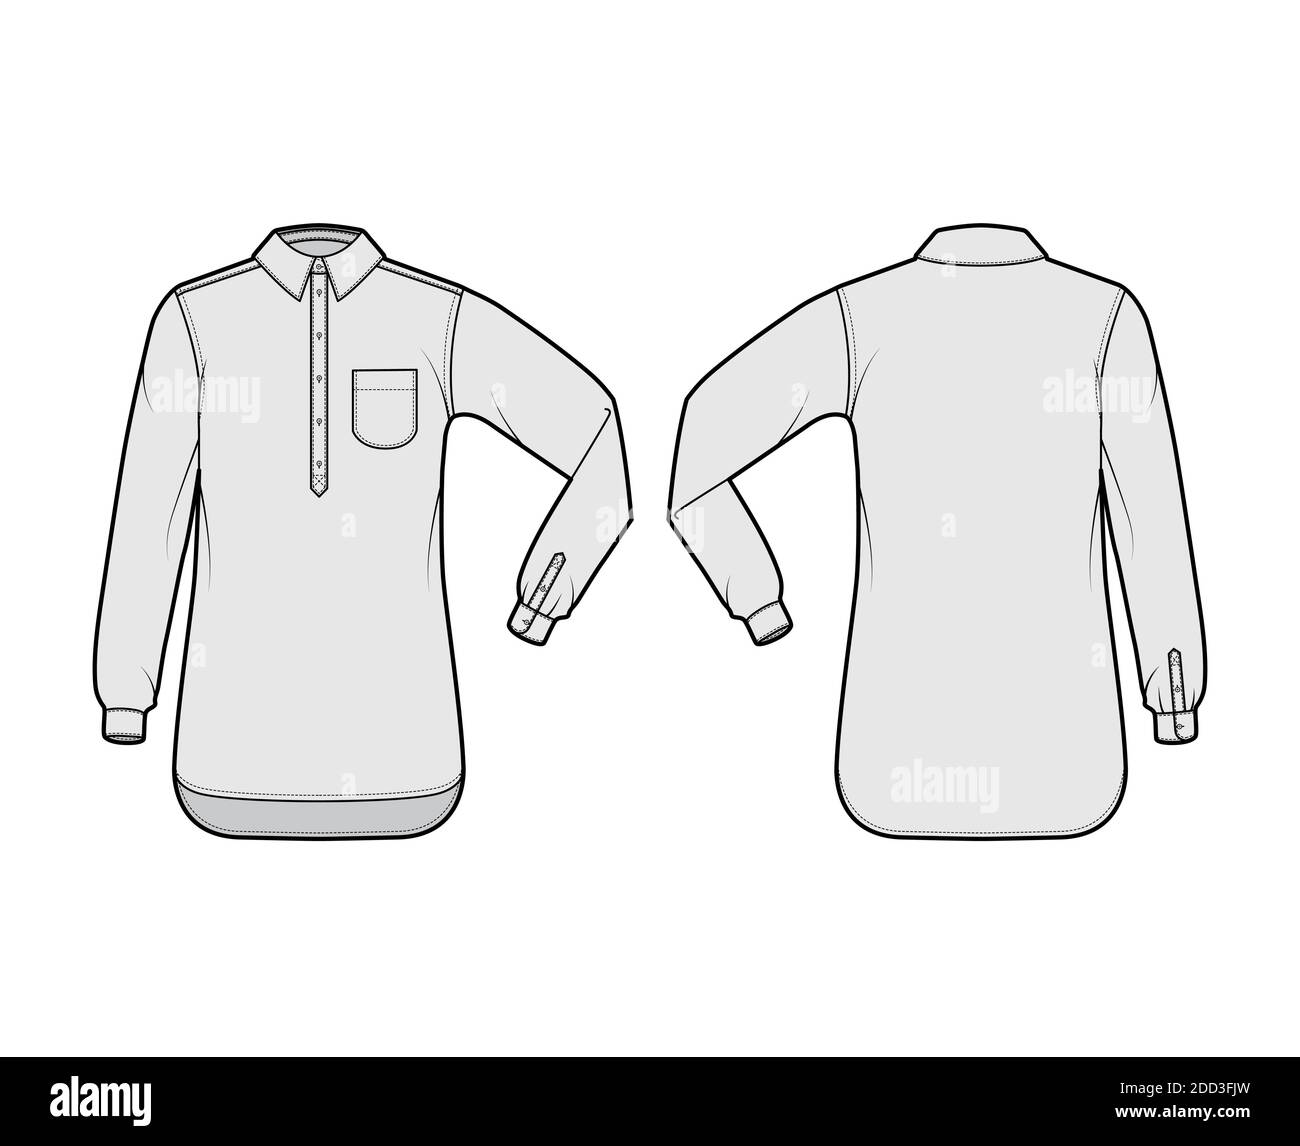 Shirt pullover technical fashion illustration with rounded pocket ...